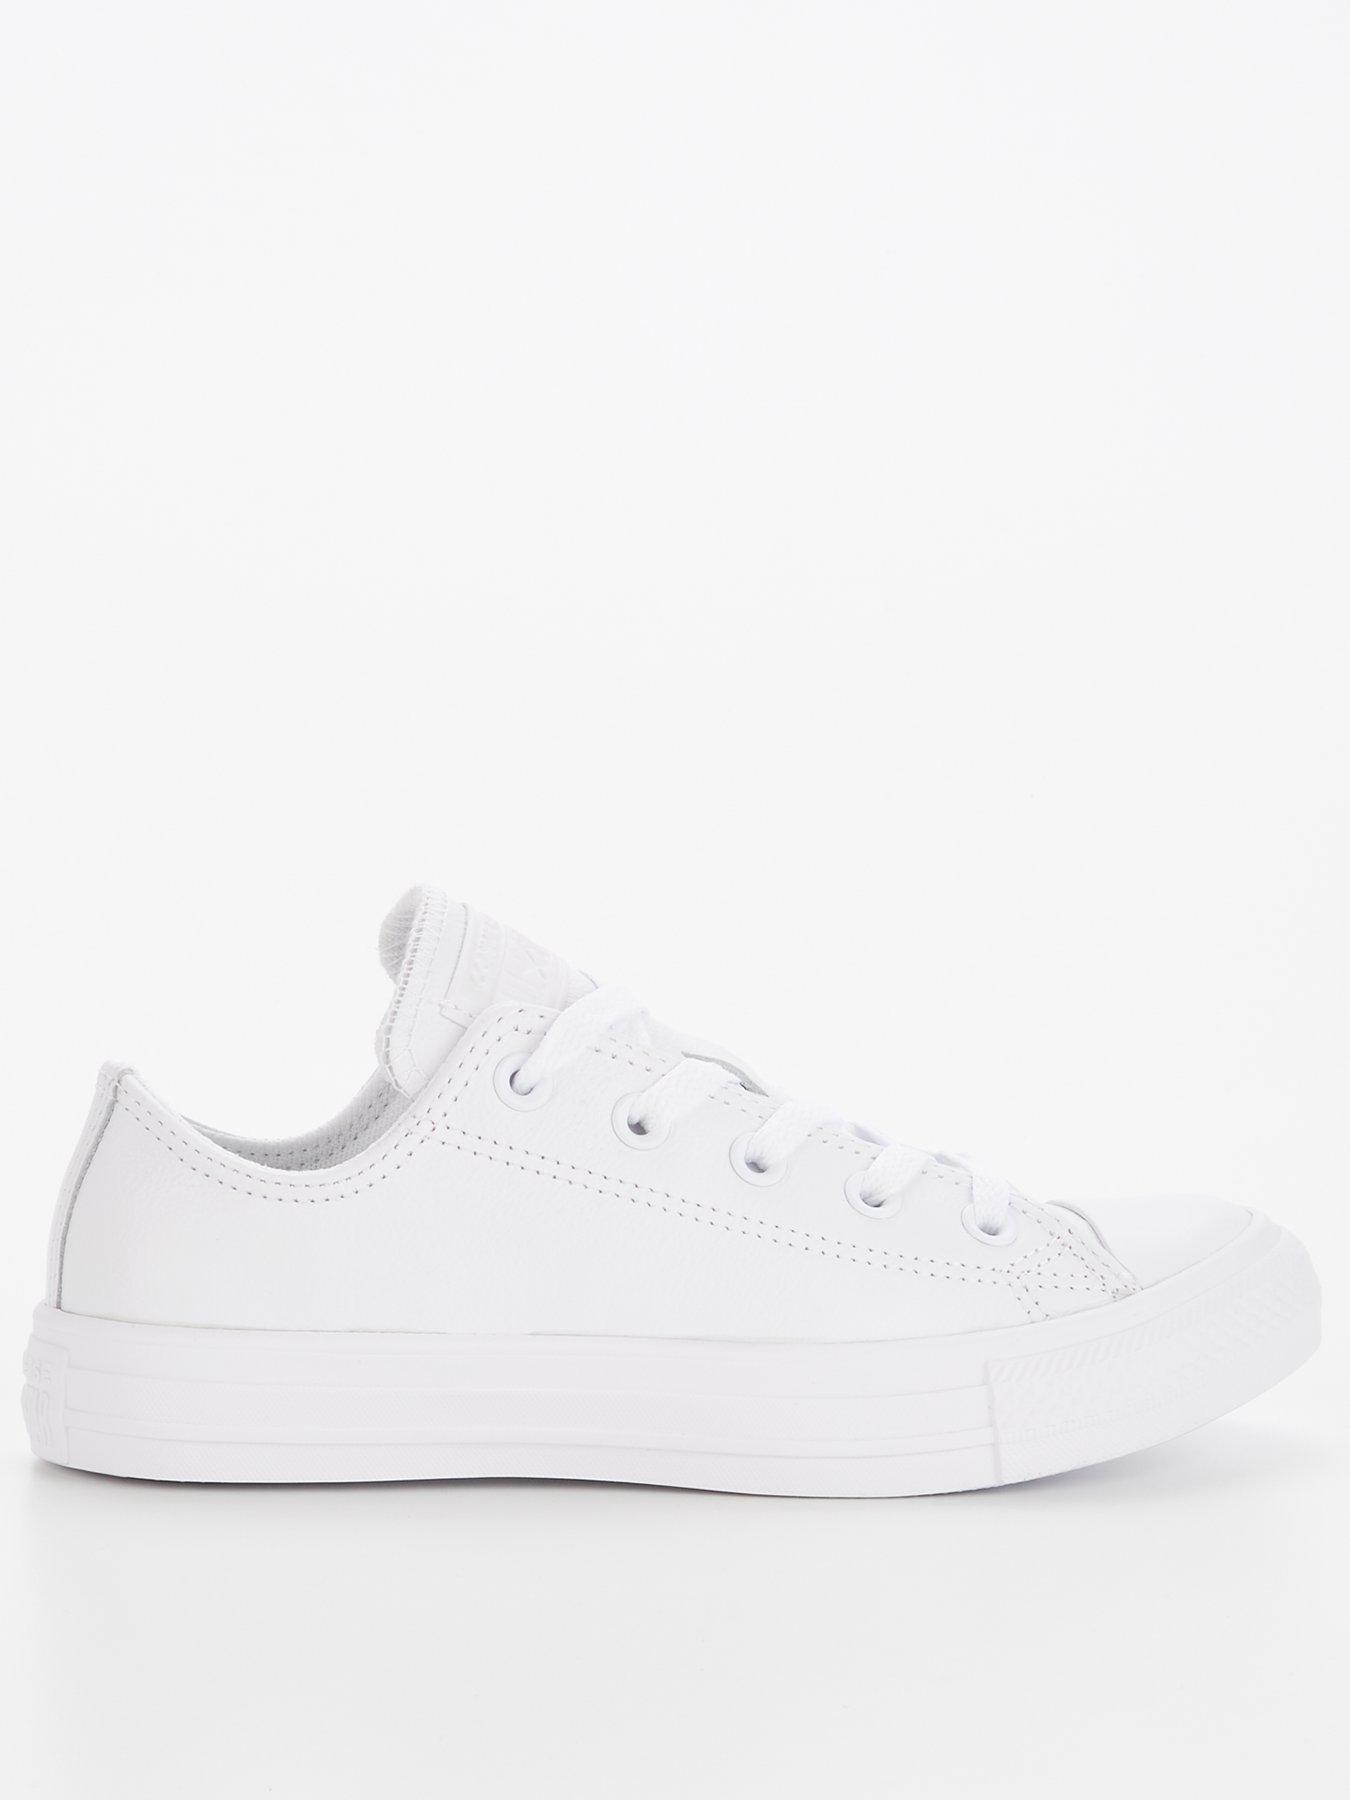 Converse All Star Leather Ox - White/White | littlewoods.com